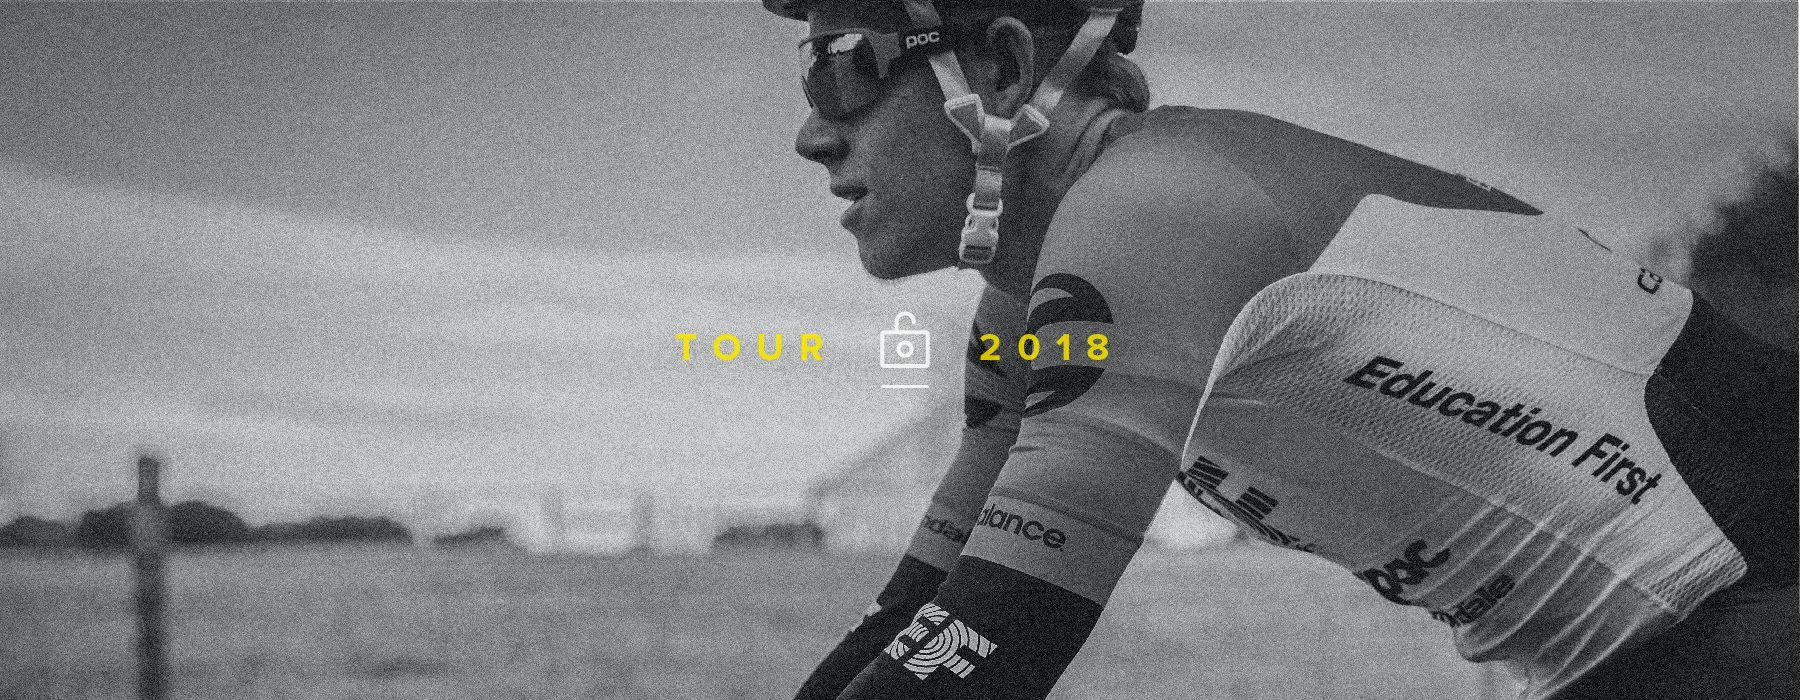 Fitness Monitor for Cycling Shares Biometric Data of Tour de France